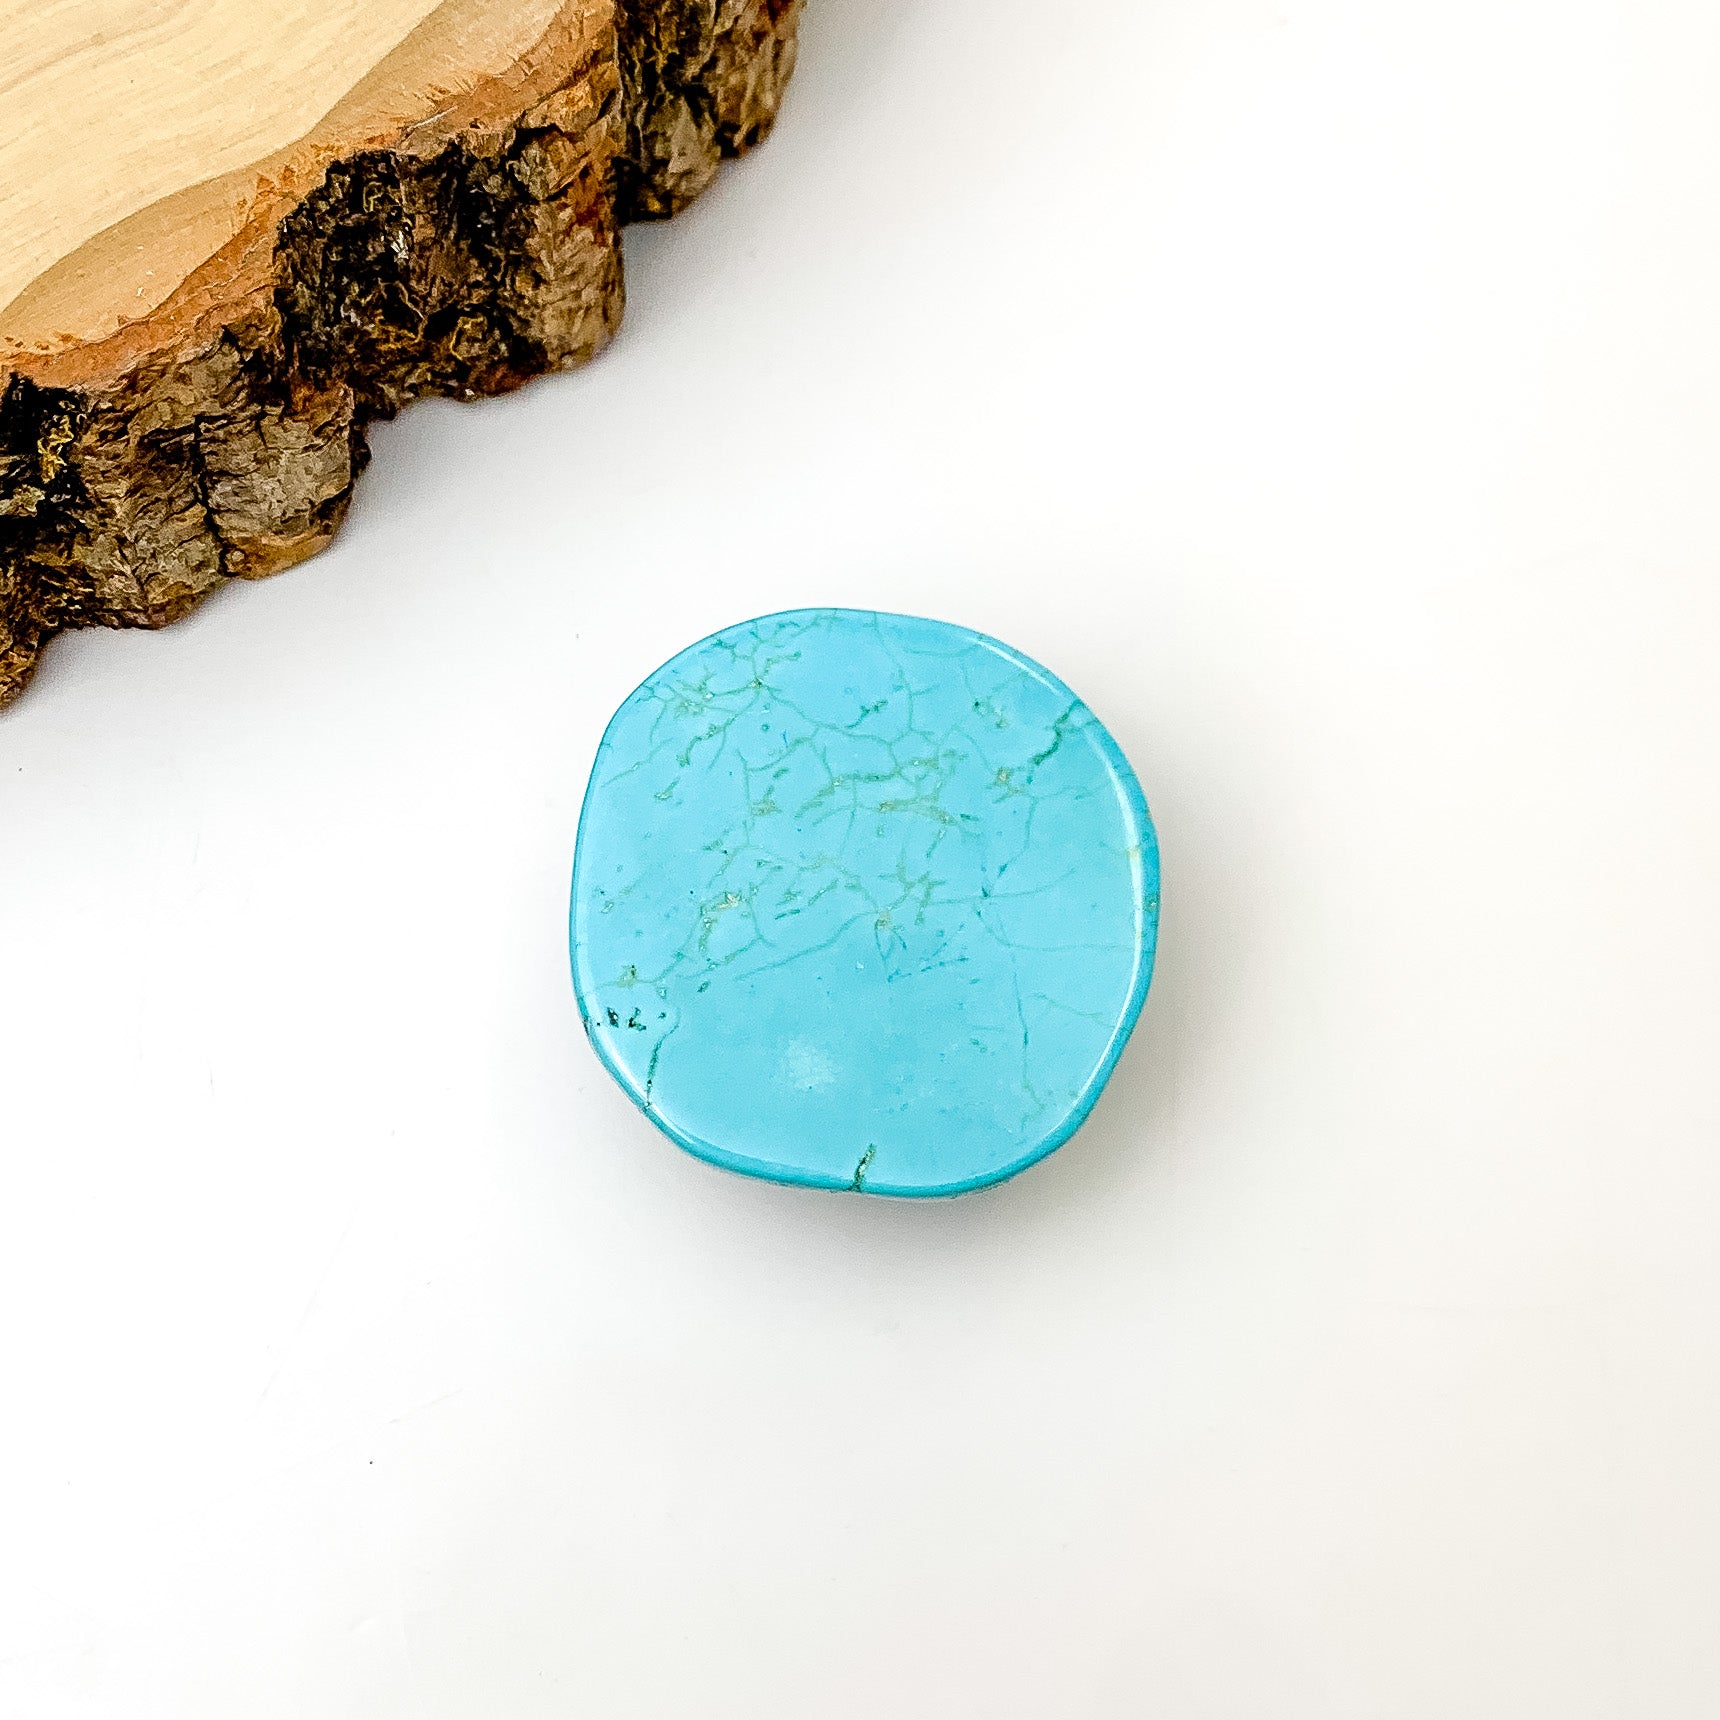 Turquoise Slab Circular Phone Grip. Pictured on a white background with a wood piece in the top left corner.